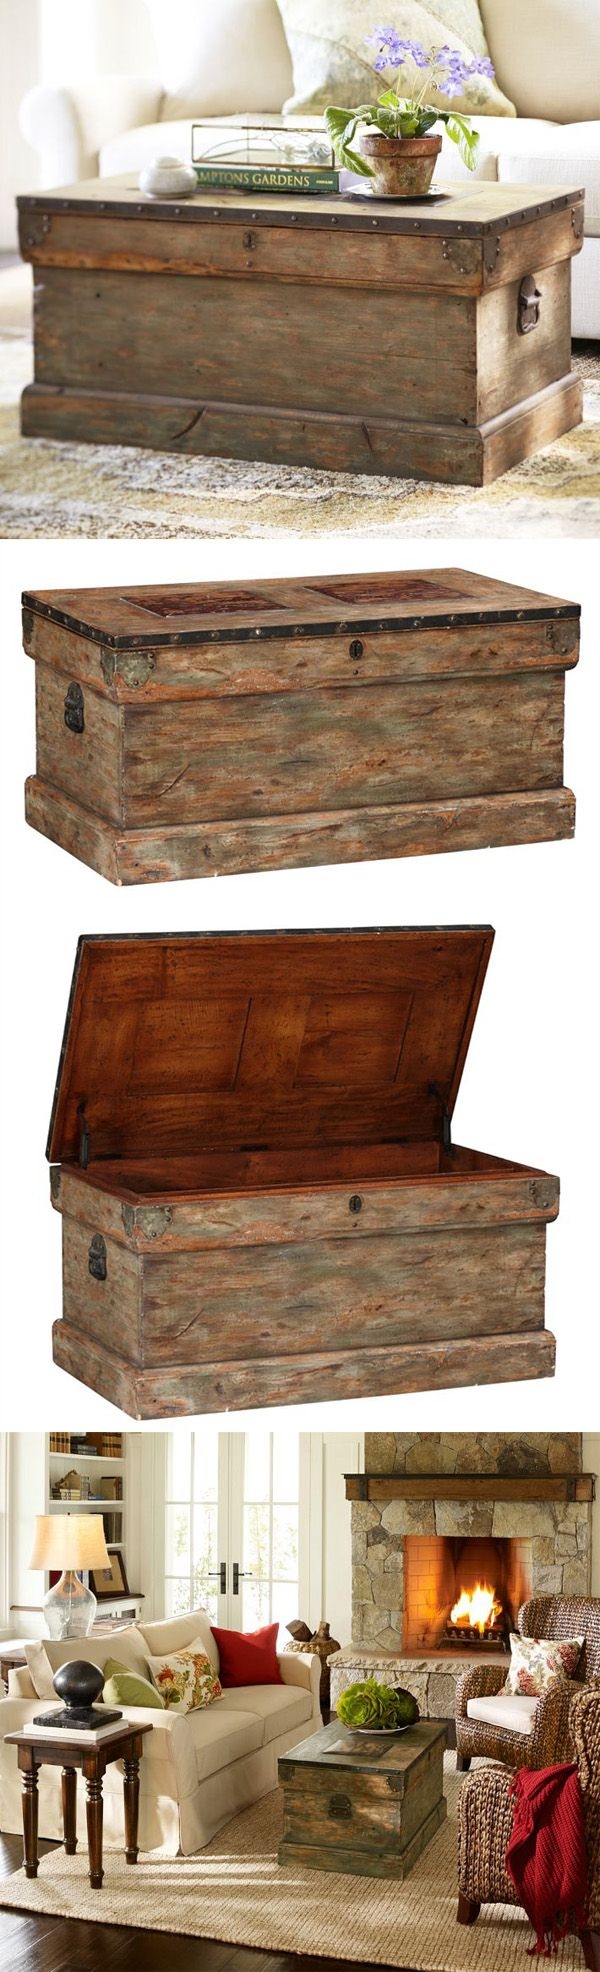 living room toy chest